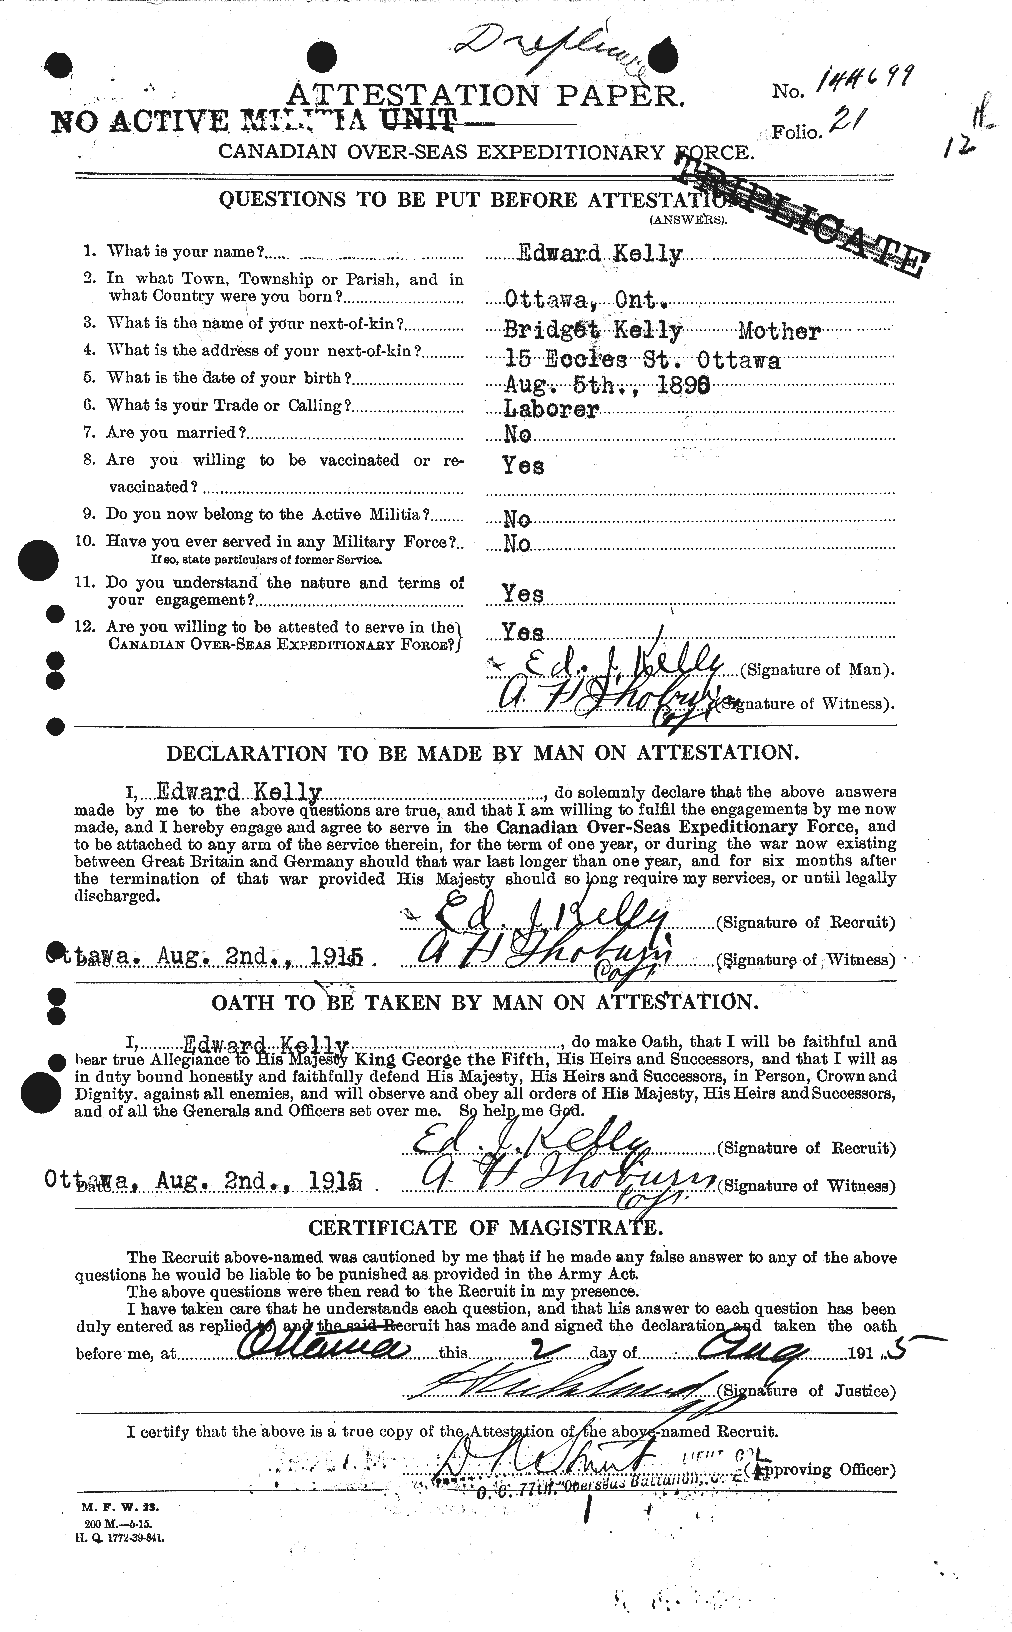 Personnel Records of the First World War - CEF 431334a